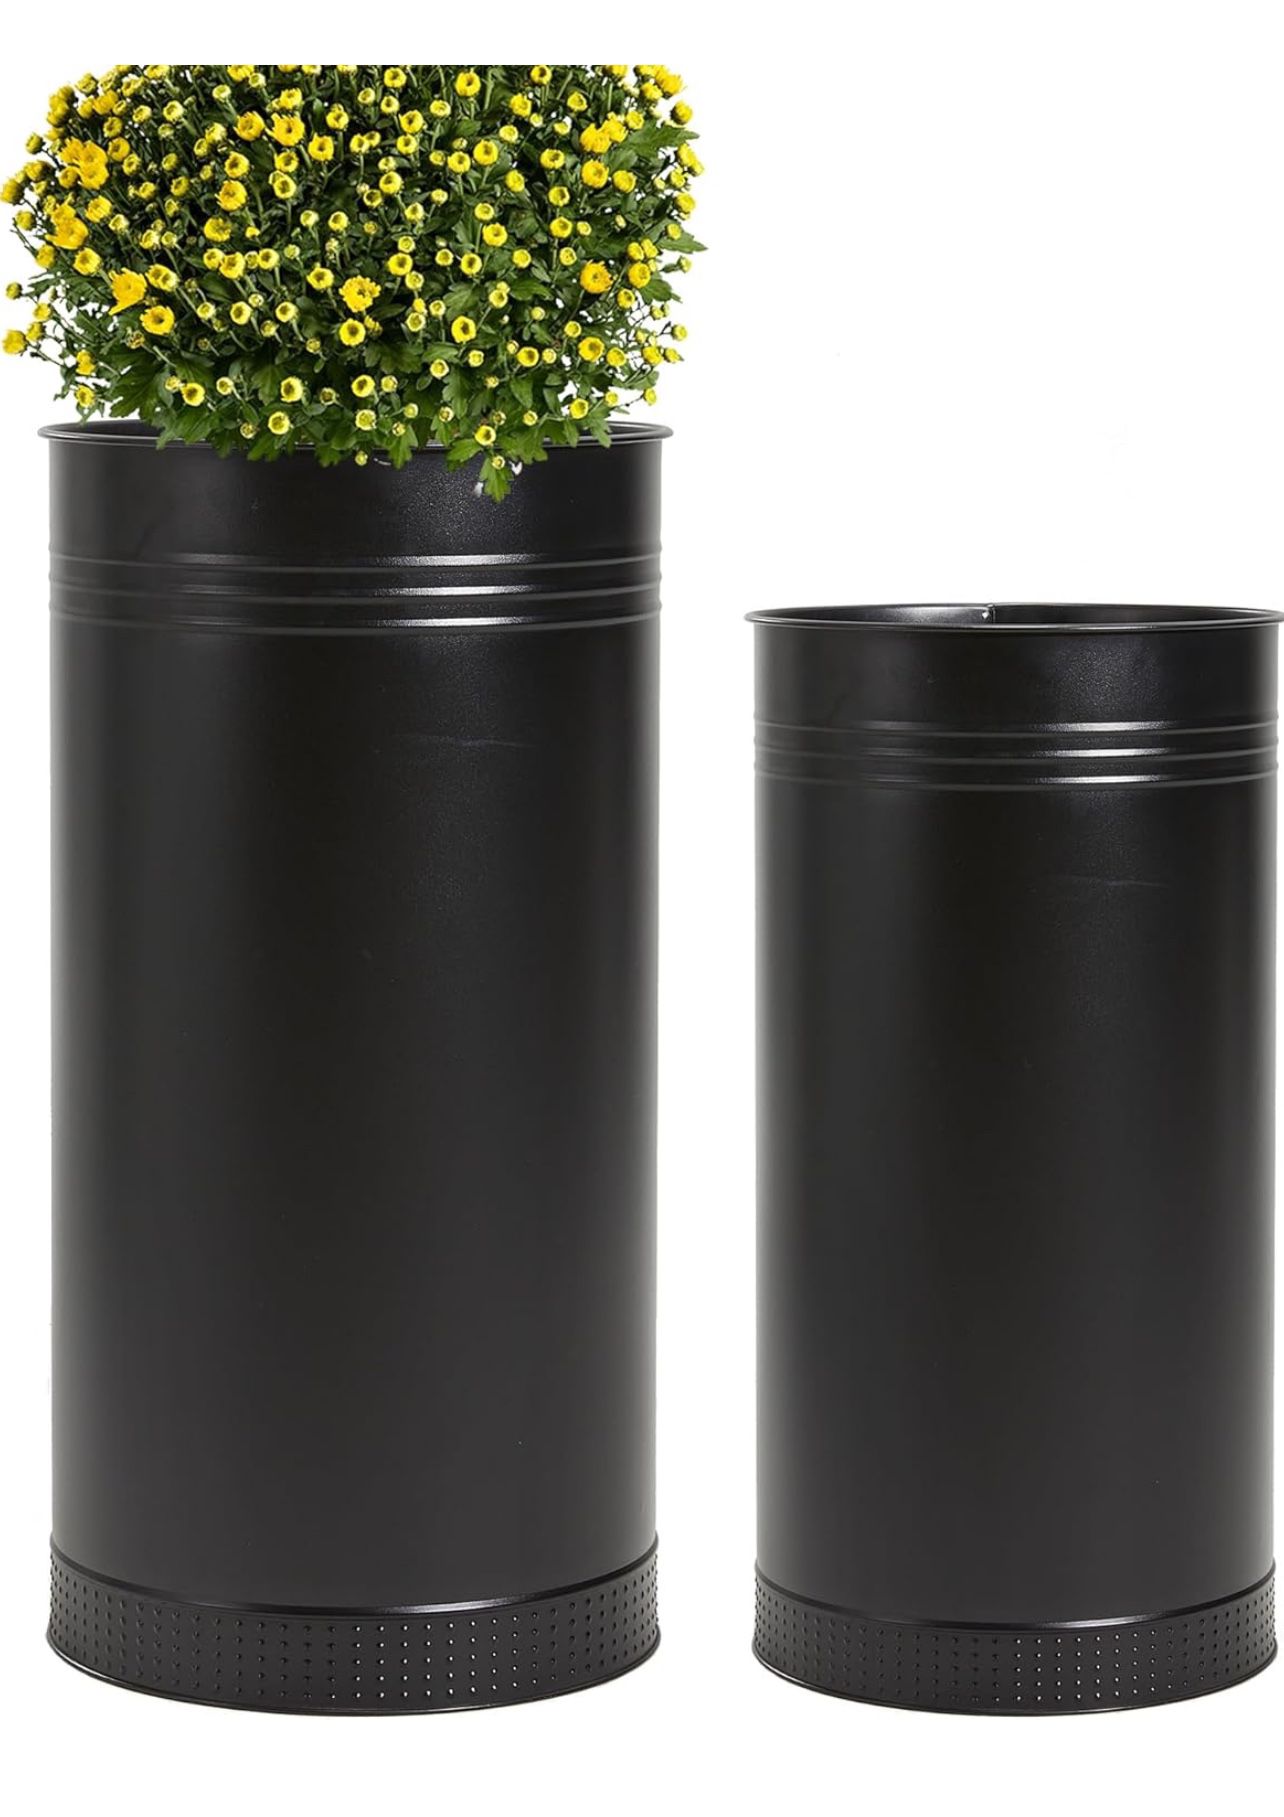 Garden Galvanized Steel Planter 2-Pack - Large:28"x14.5" & Small:24"x12" - Tall Metal Plant Pots - Large Handcrafted Decoration Flower Pot for Indoor 